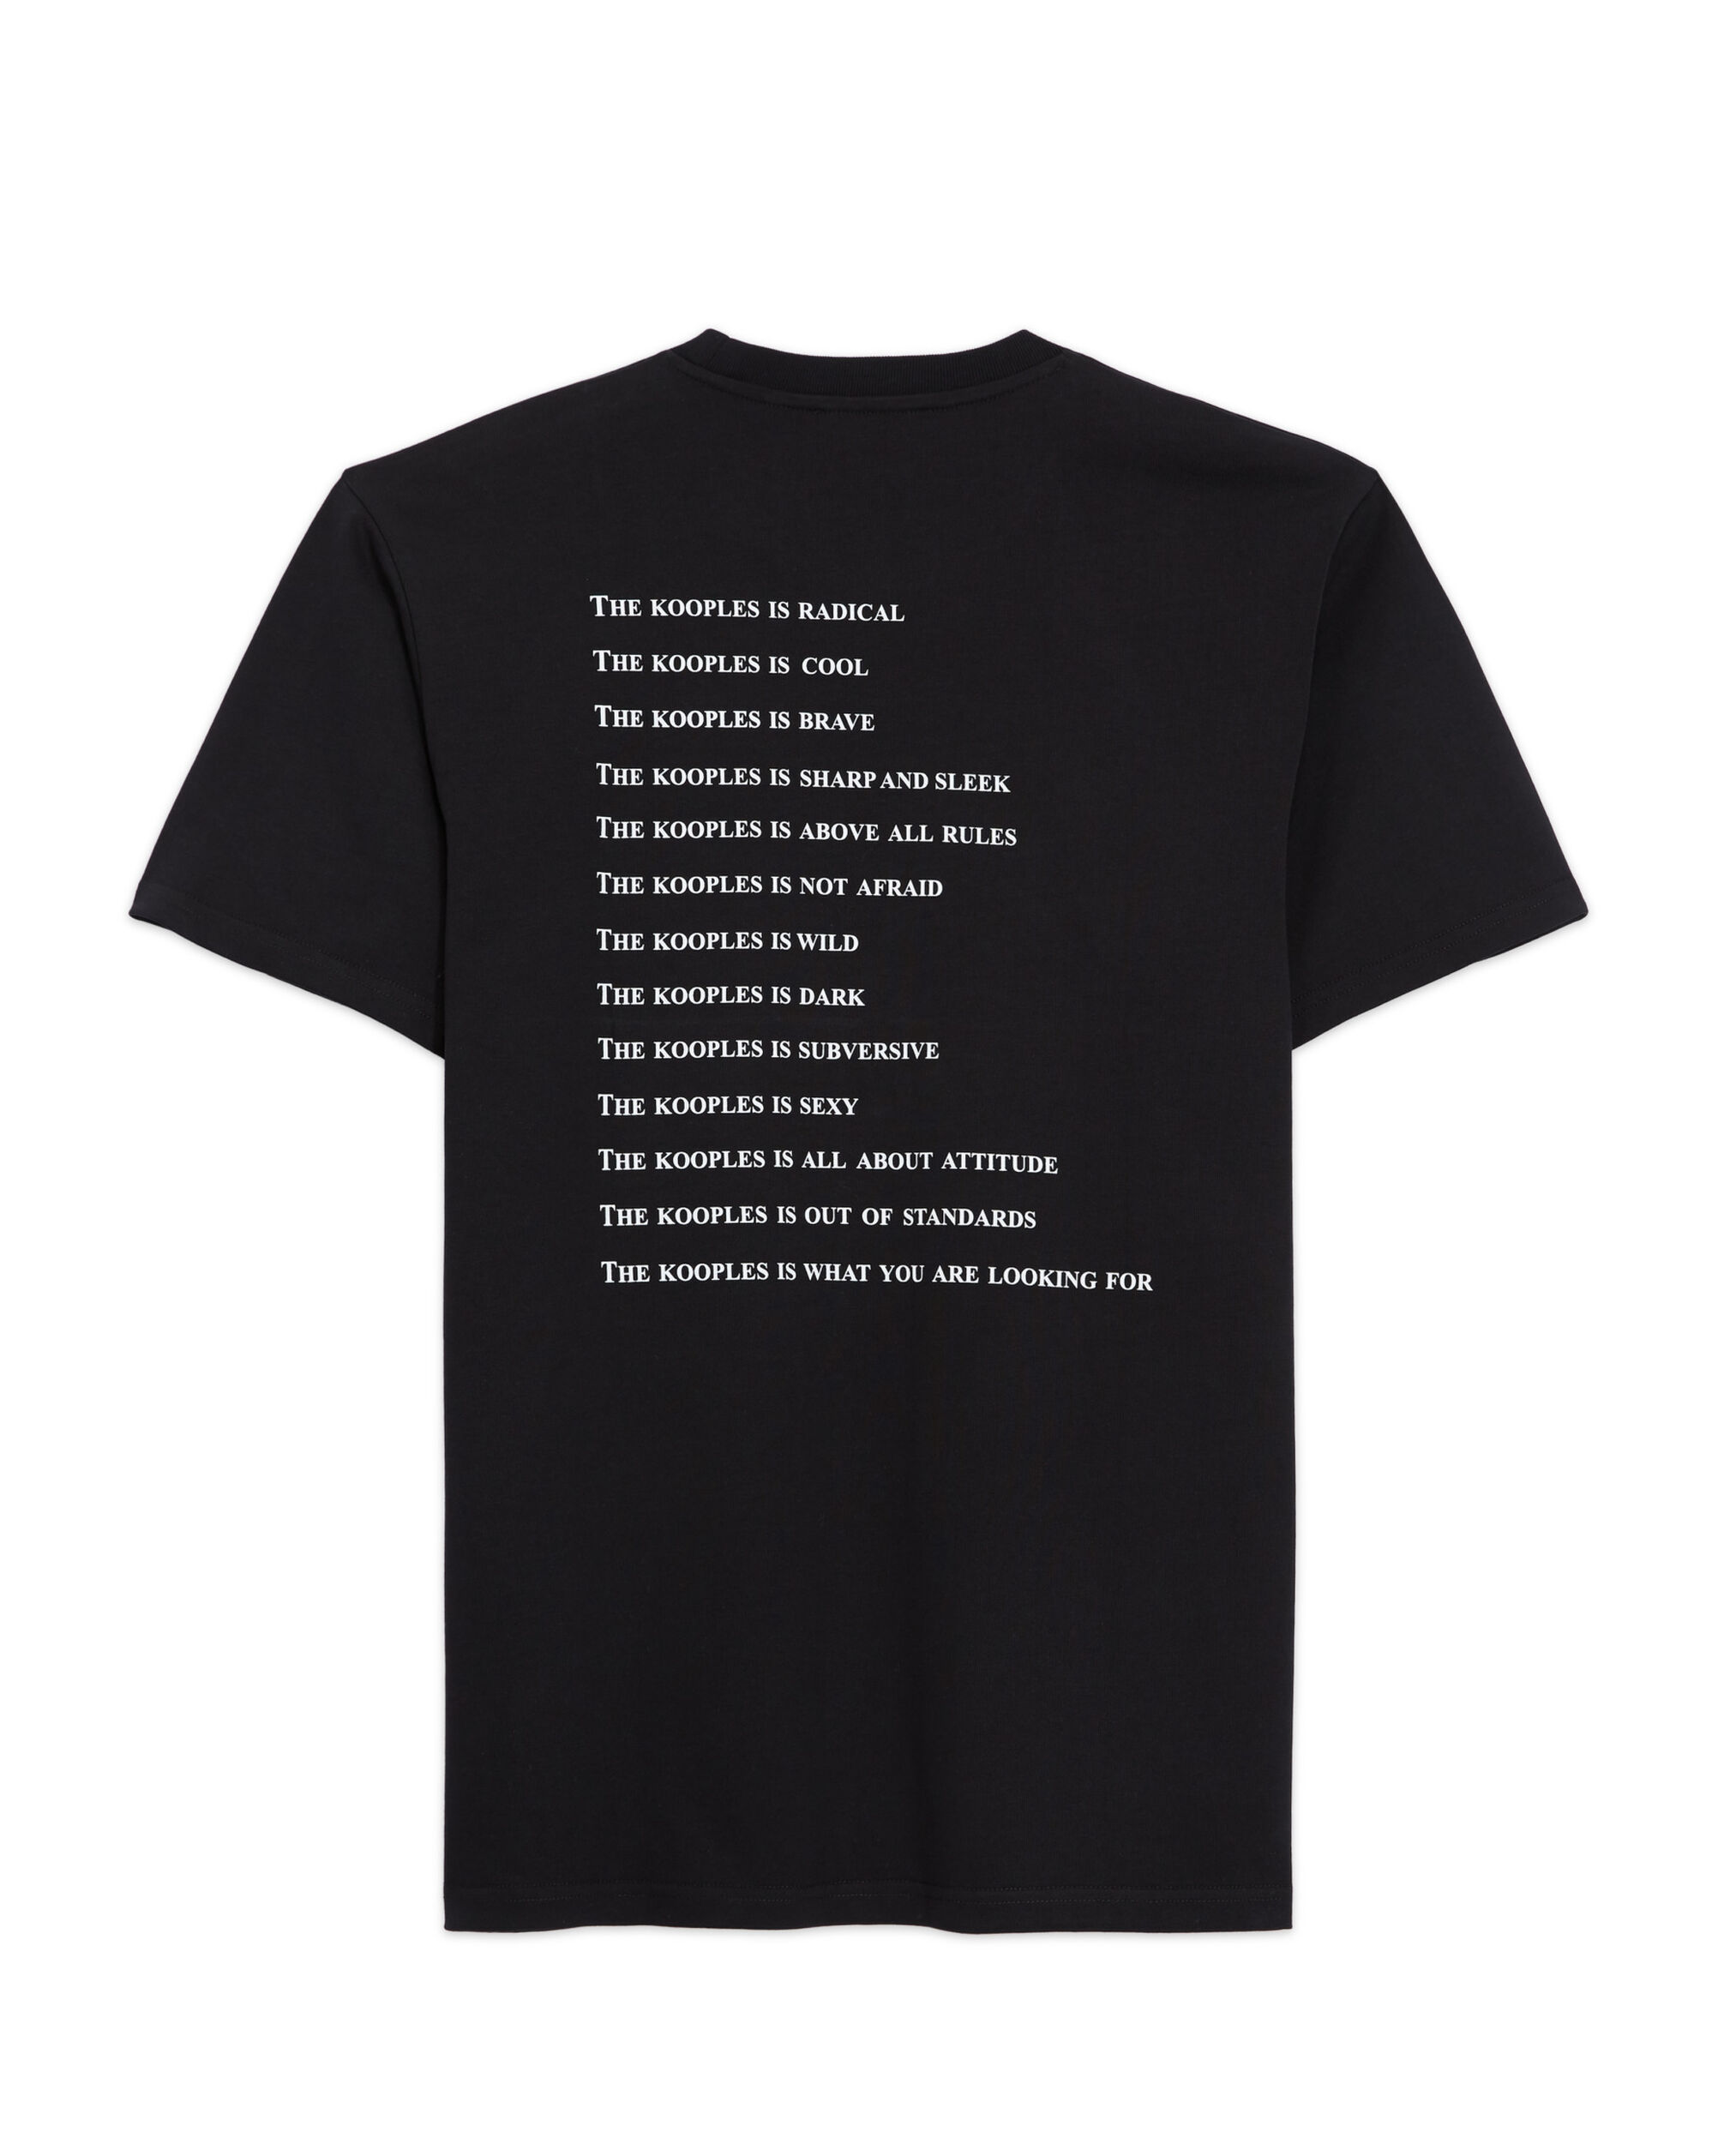 Men's black cotton t-shirt with what is print, BLACK, hi-res image number null